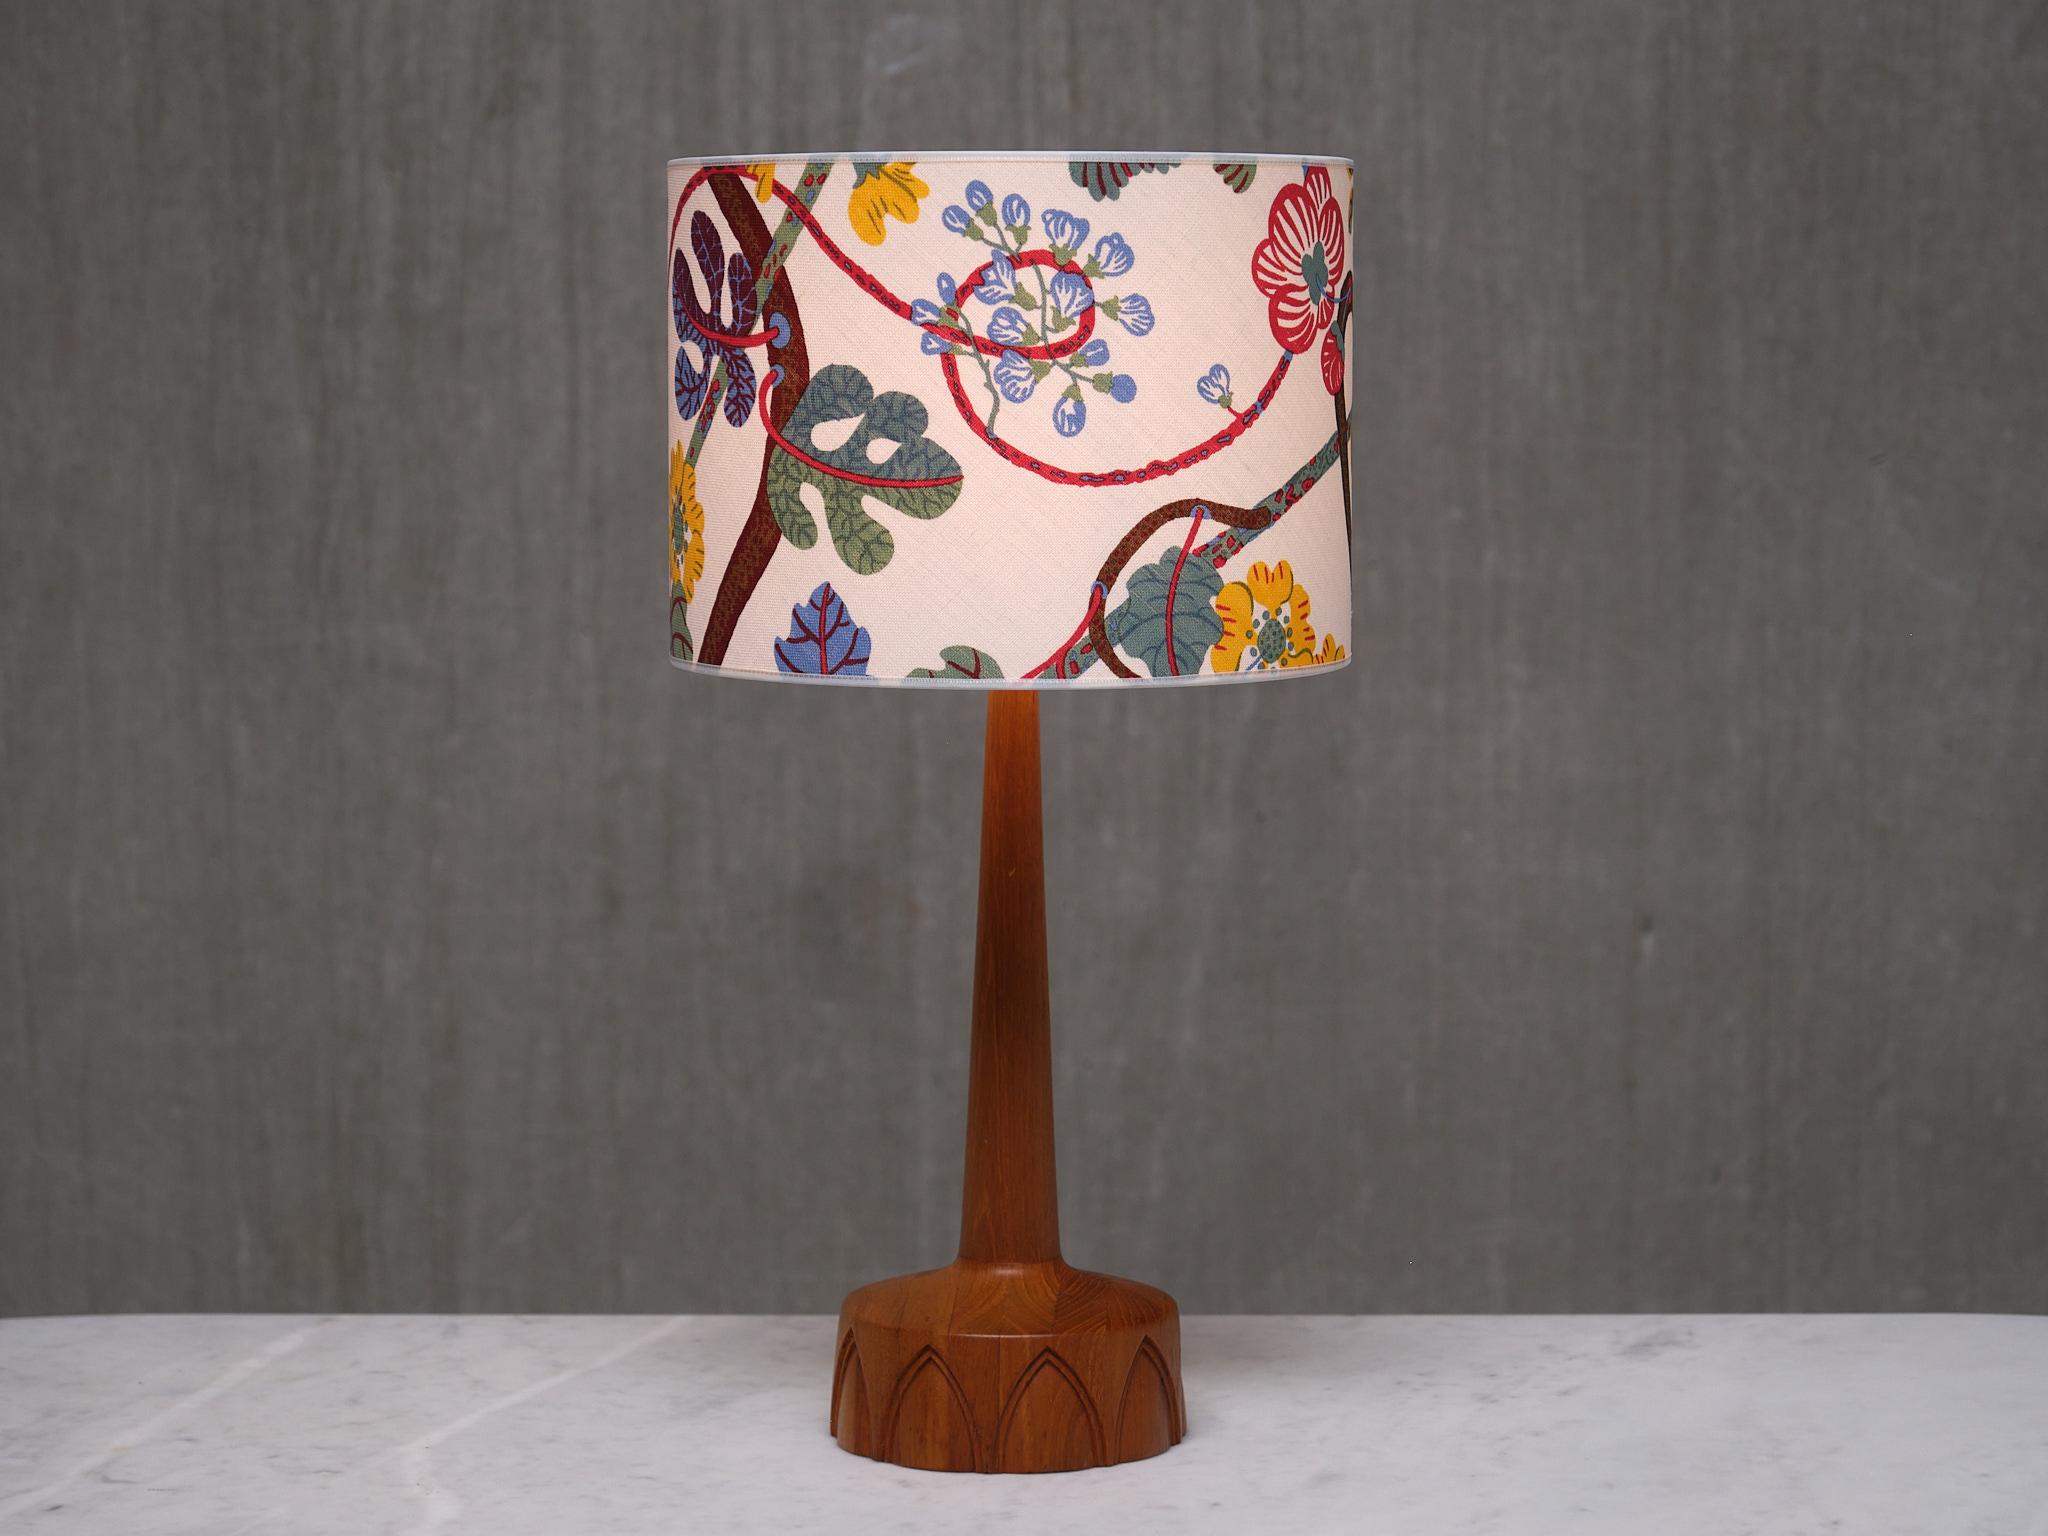 Pair of Stilarmatur Tranås Table Lamps with Josef Frank Shades, Sweden, 1960s For Sale 1